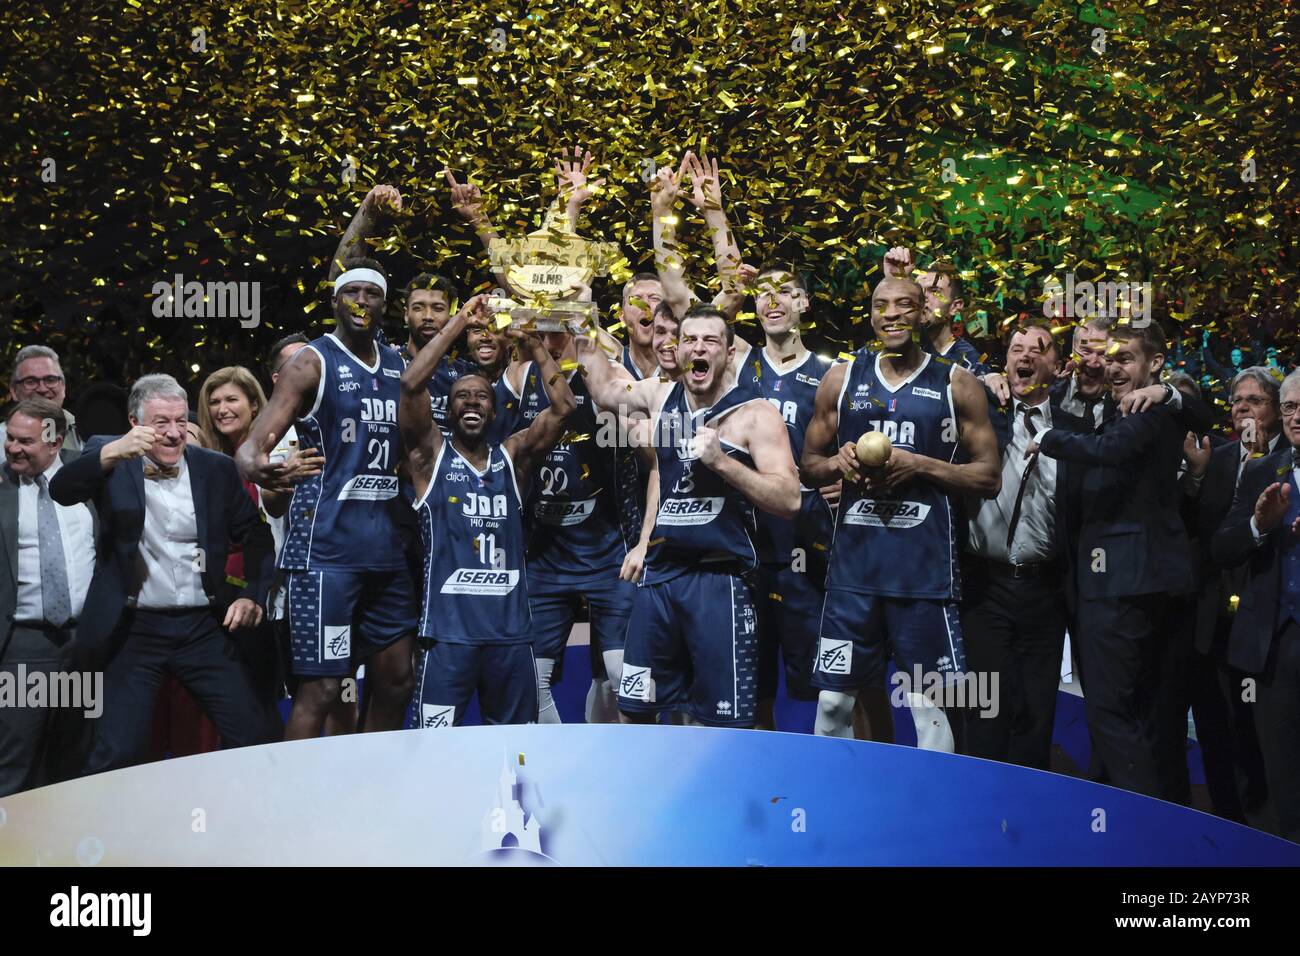 Marne La Vallee, Seine et Marne, France. 16th Feb, 2020. Podium of Dijon player after their victory during the LNB Basket Leaders Cup Final between the team whose owner is Tony Parker ASVEL and Dijon at the Disney Events Arena in Paris - France.Dijon won 77-69. Credit: Pierre Stevenin/ZUMA Wire/Alamy Live News Stock Photo